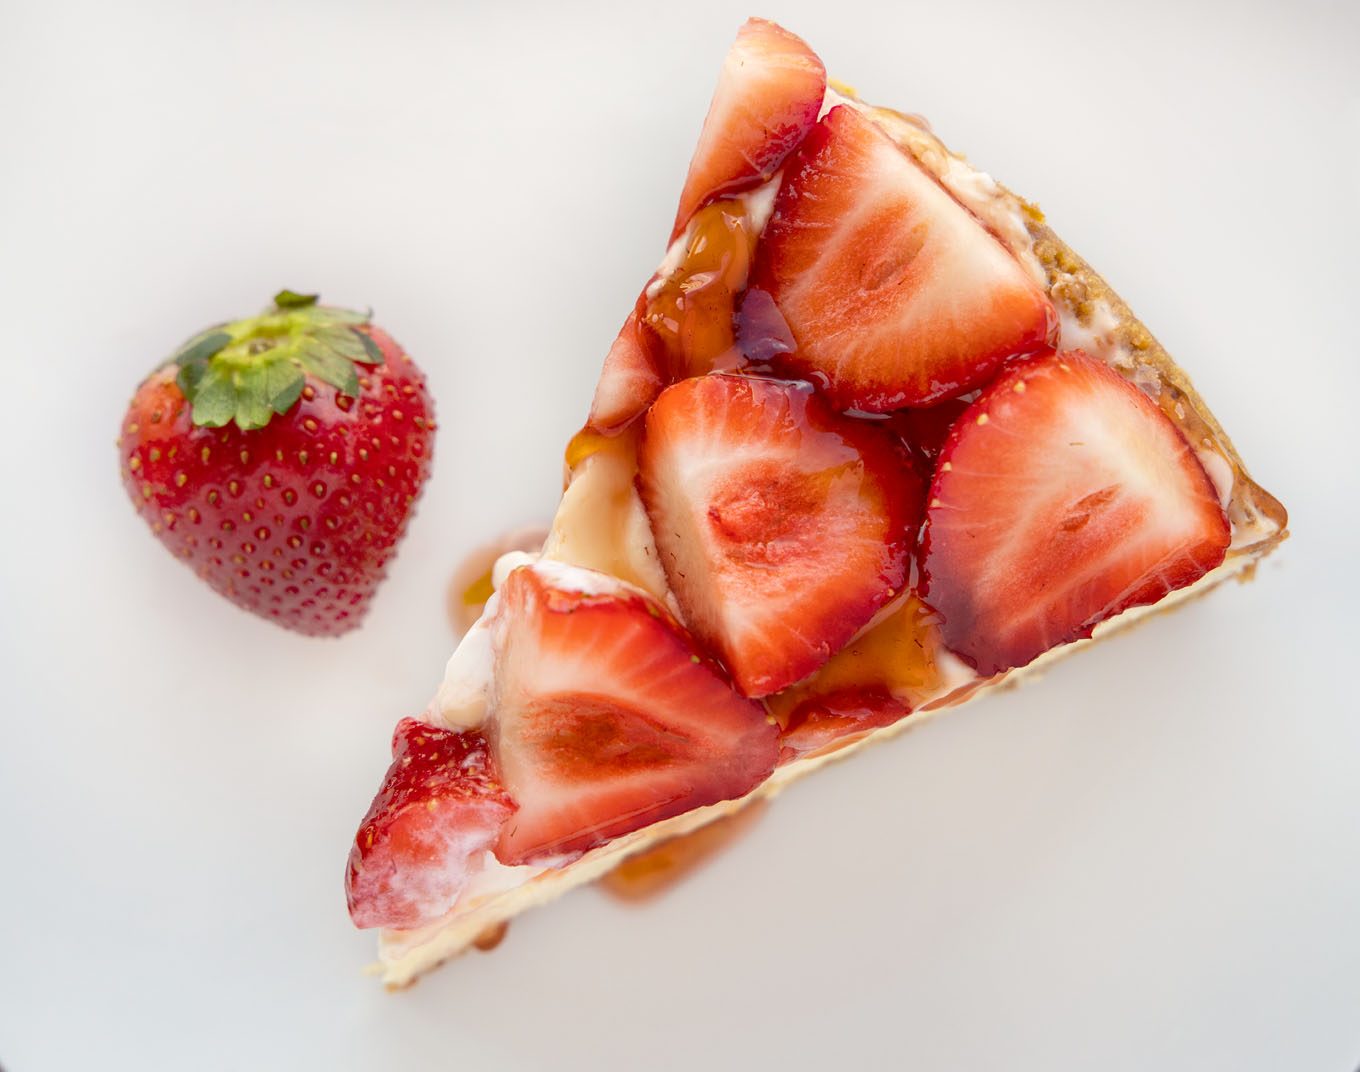  slice of strawberry cheesecake on a white plate with a strawberry